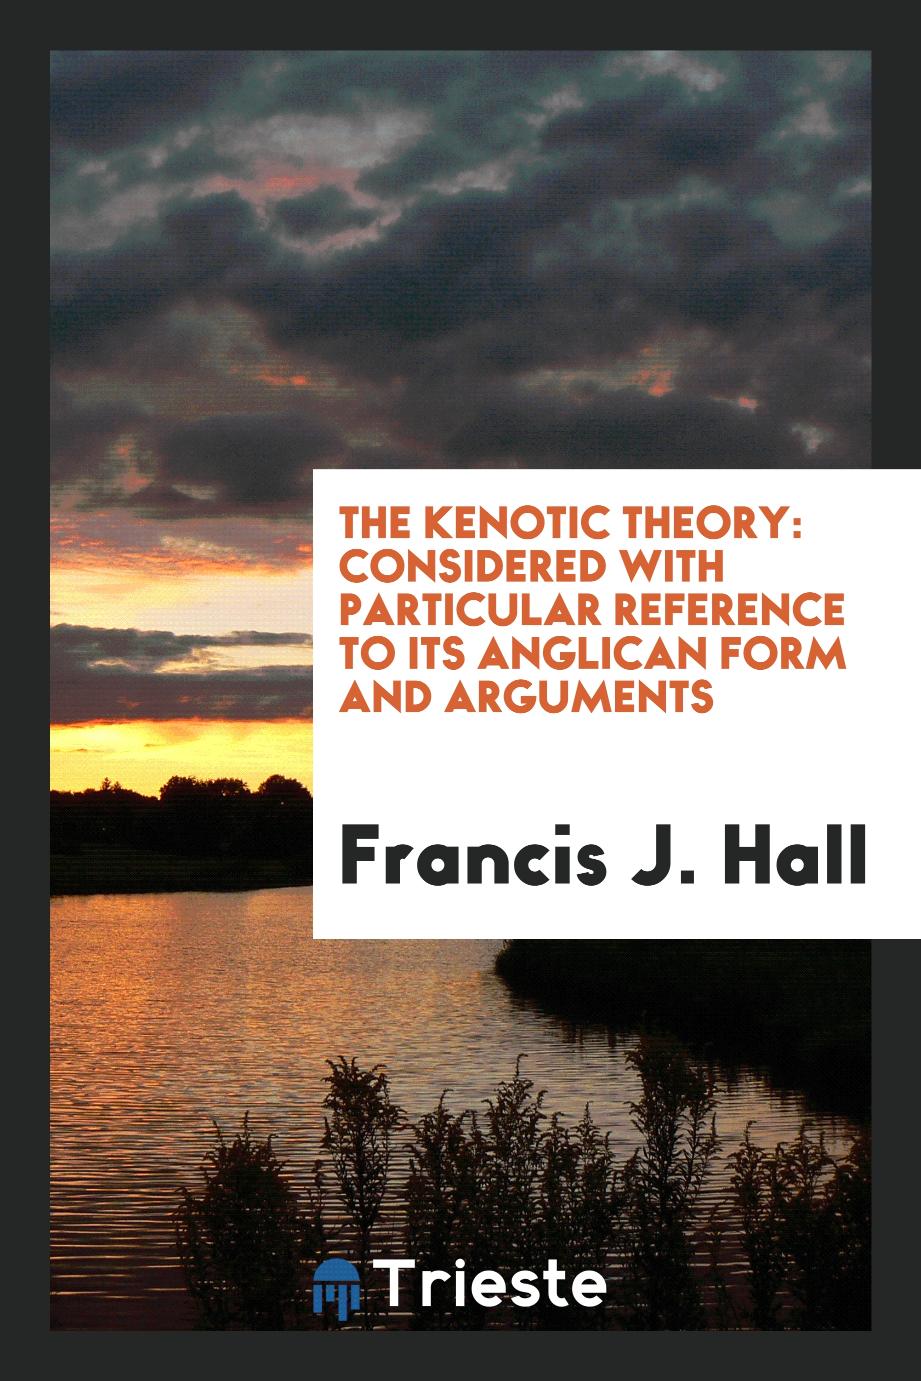 The Kenotic Theory: considered with particular reference to its Anglican form and arguments